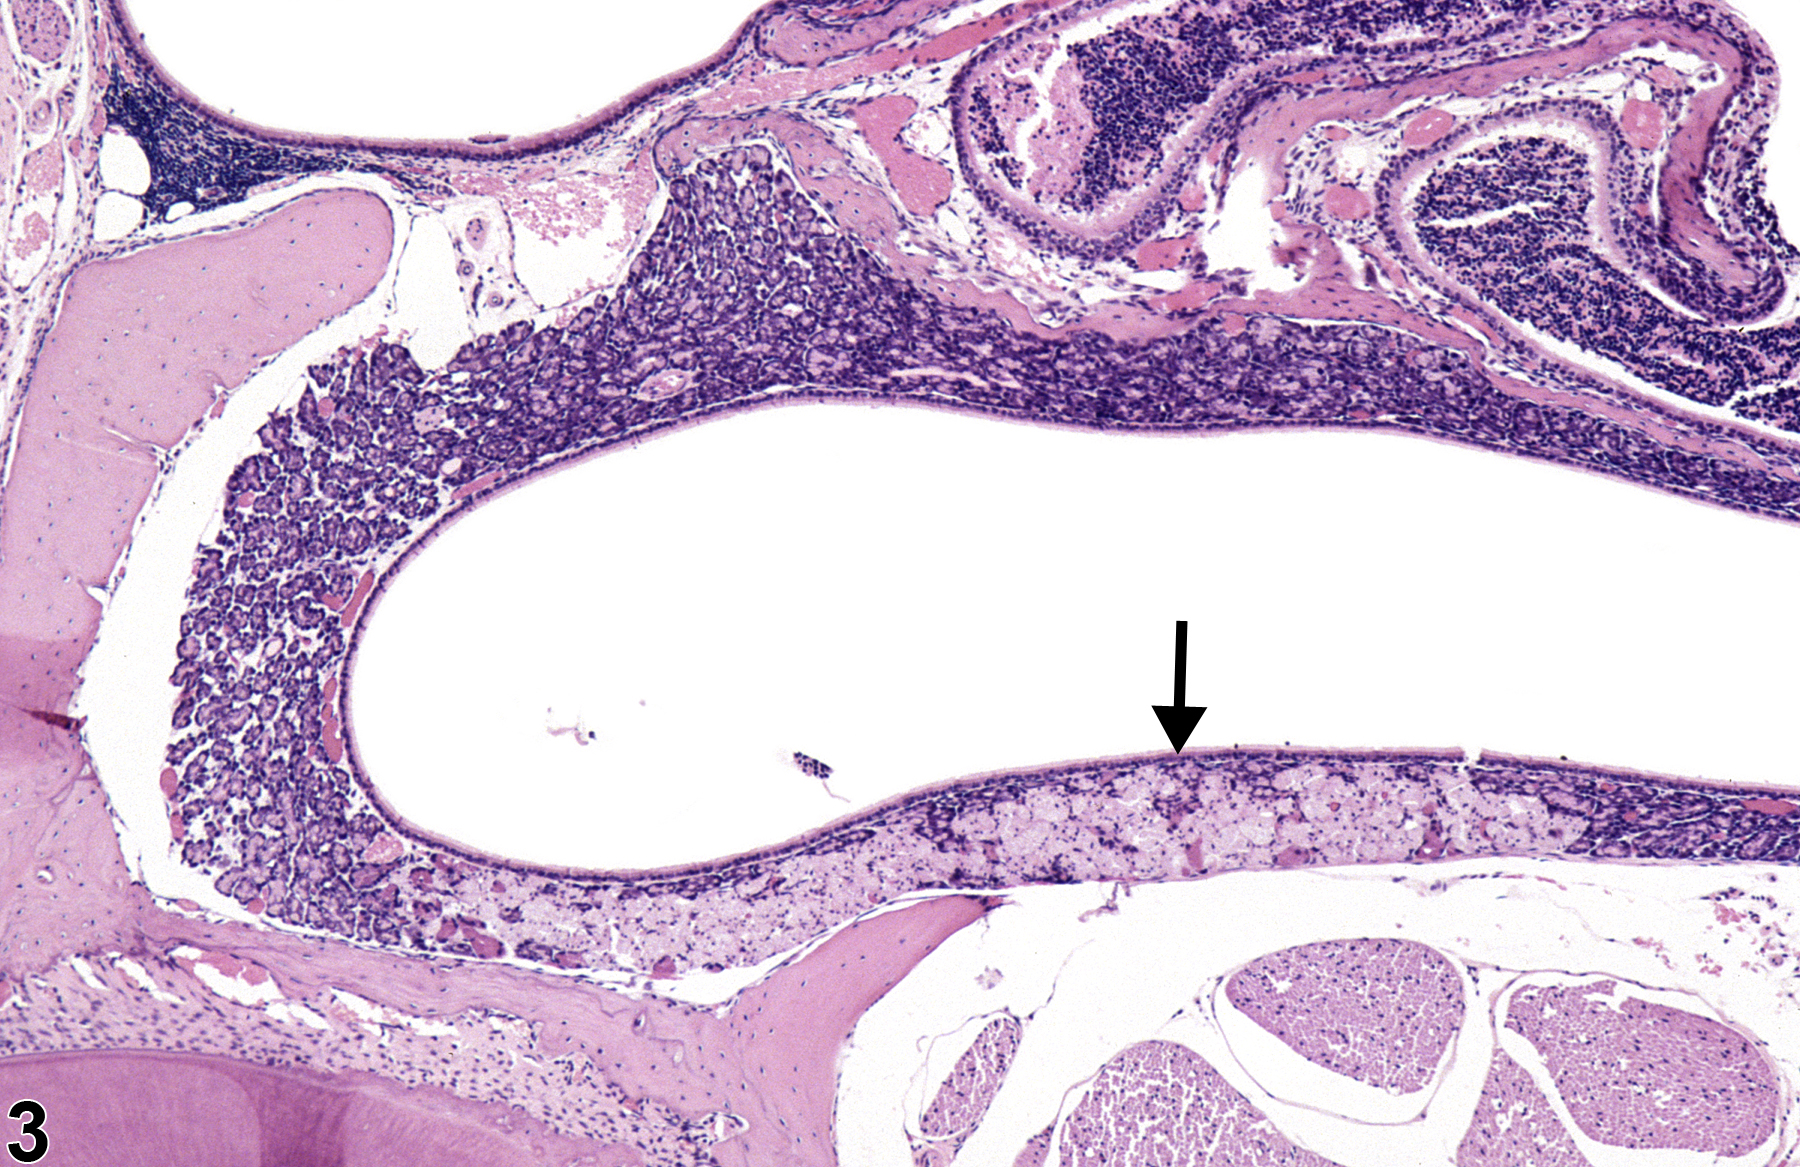 Image of degeneration in the nose, Steno's glands from a male B6C3F1/N mouse in a subchronic study